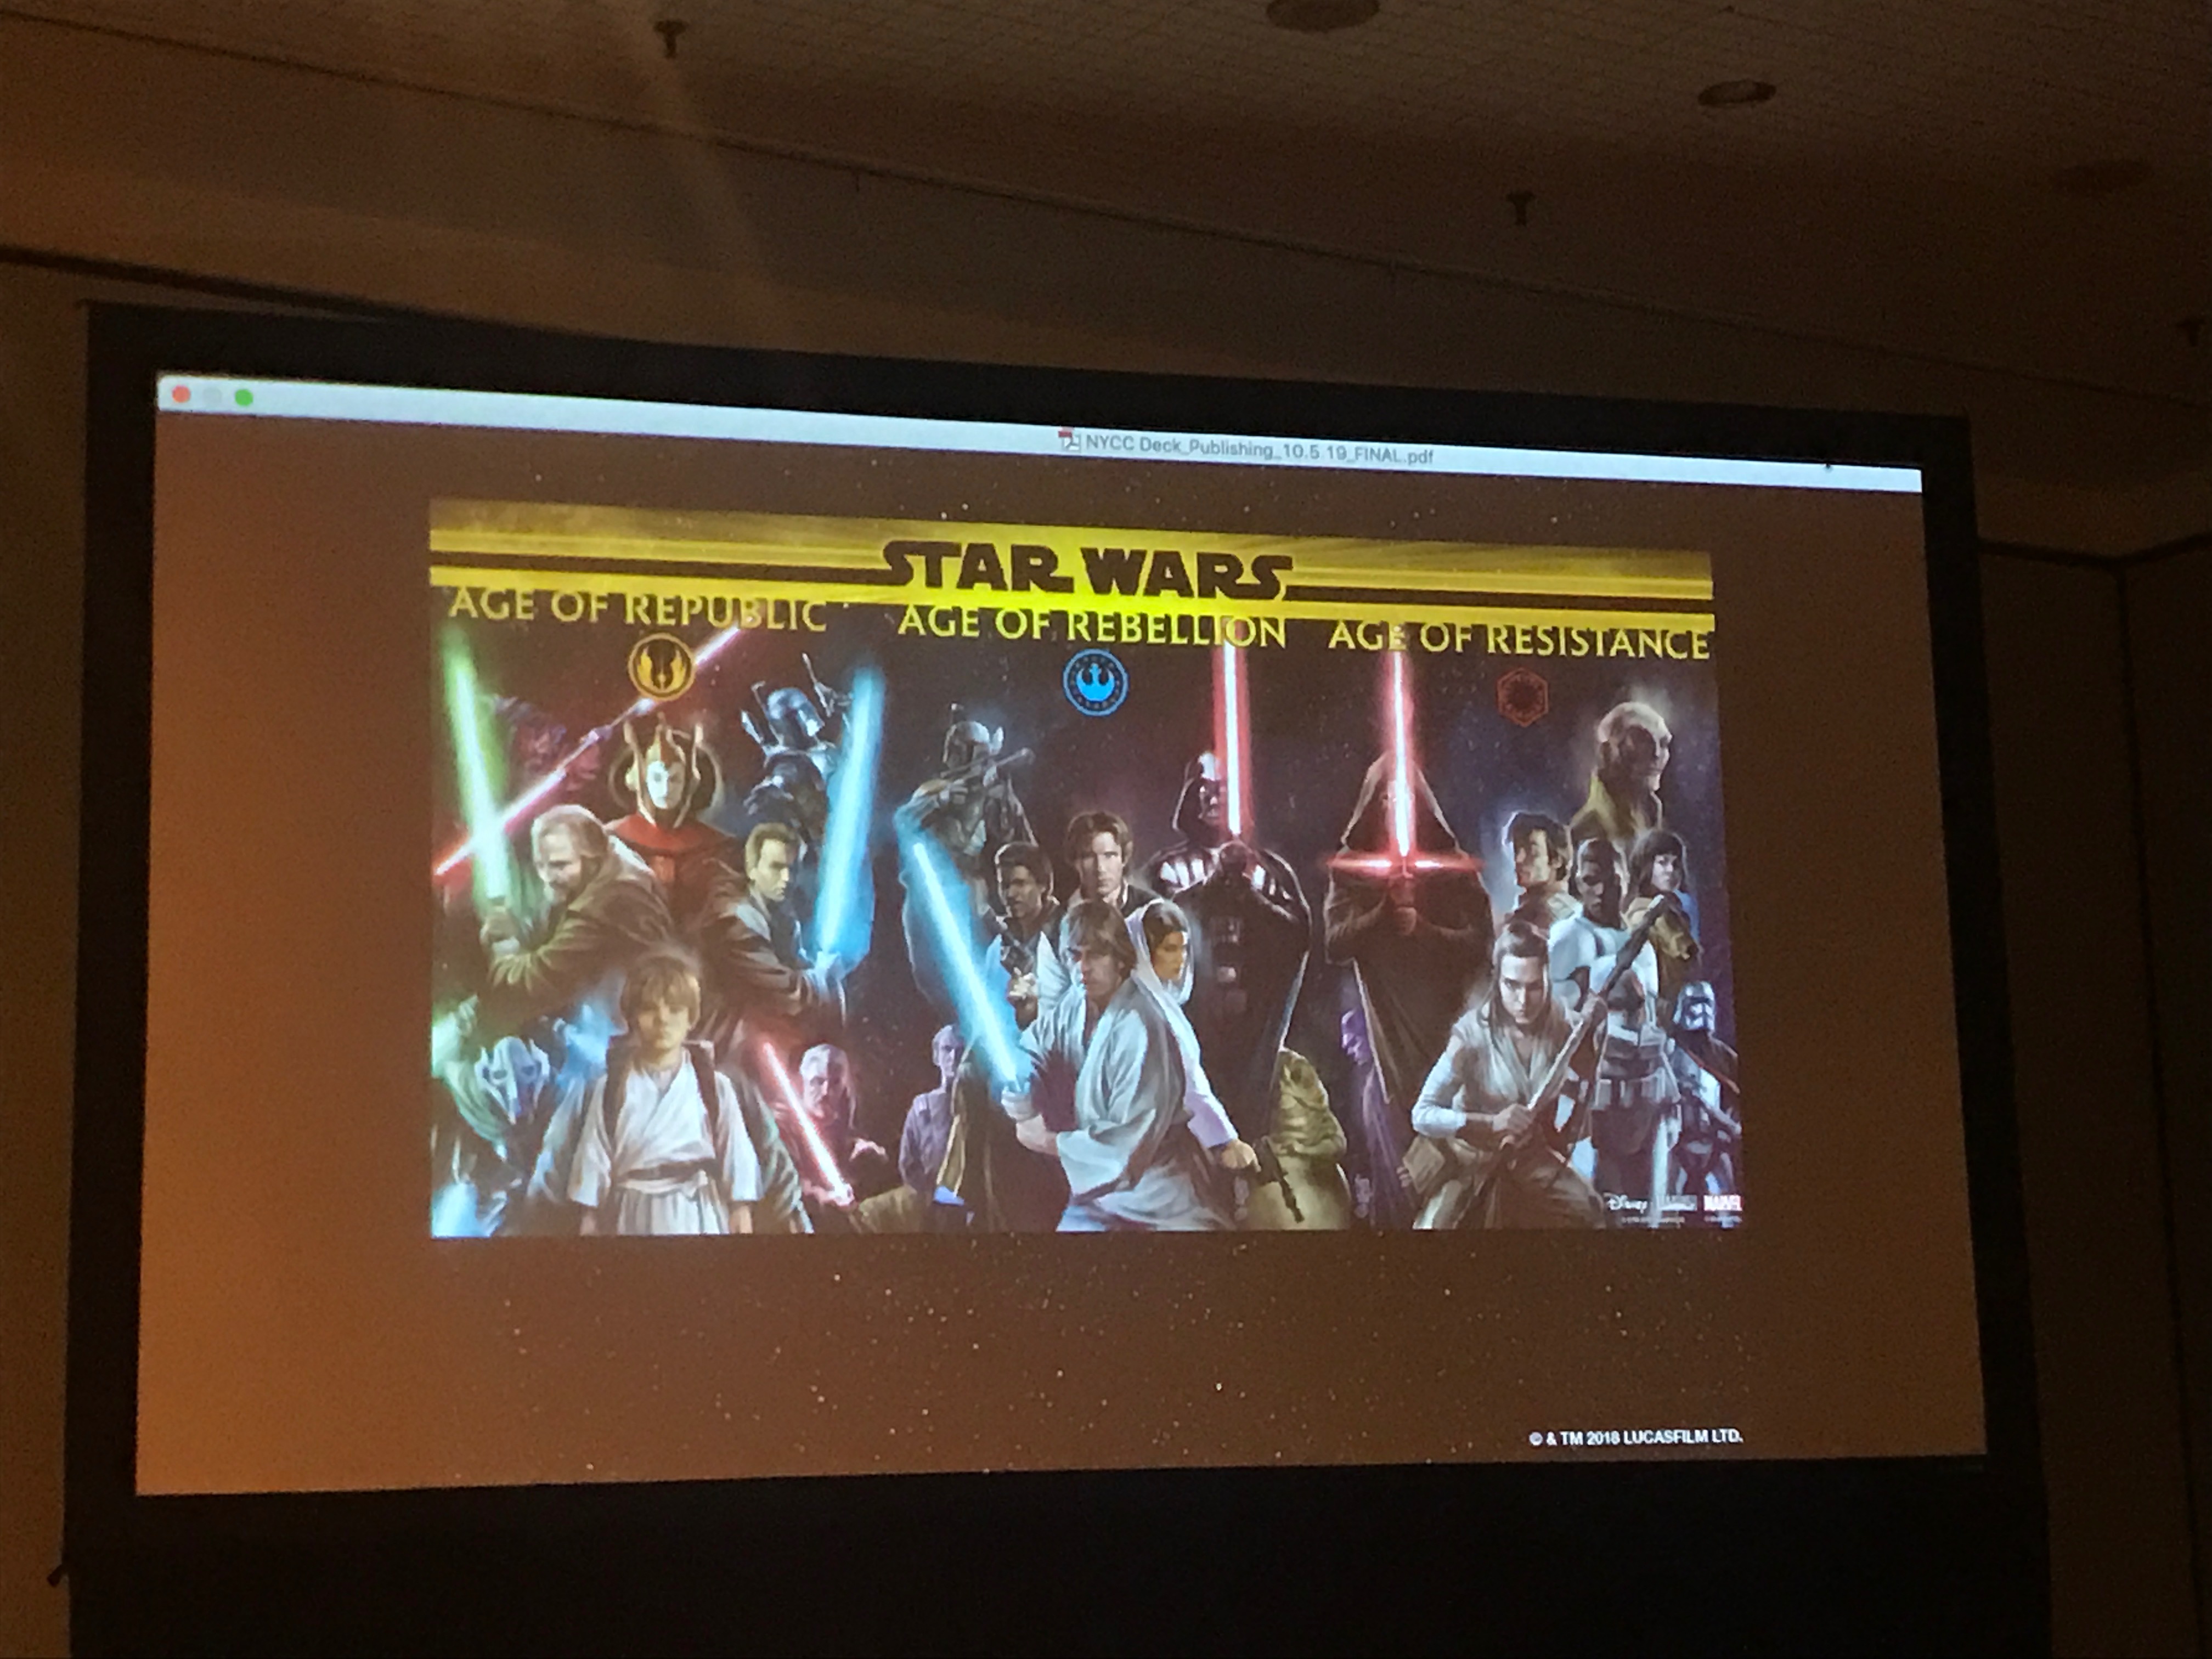 NYCC 2018: New Star Wars one-shots showcased for upcoming "Age of Star Wars" line